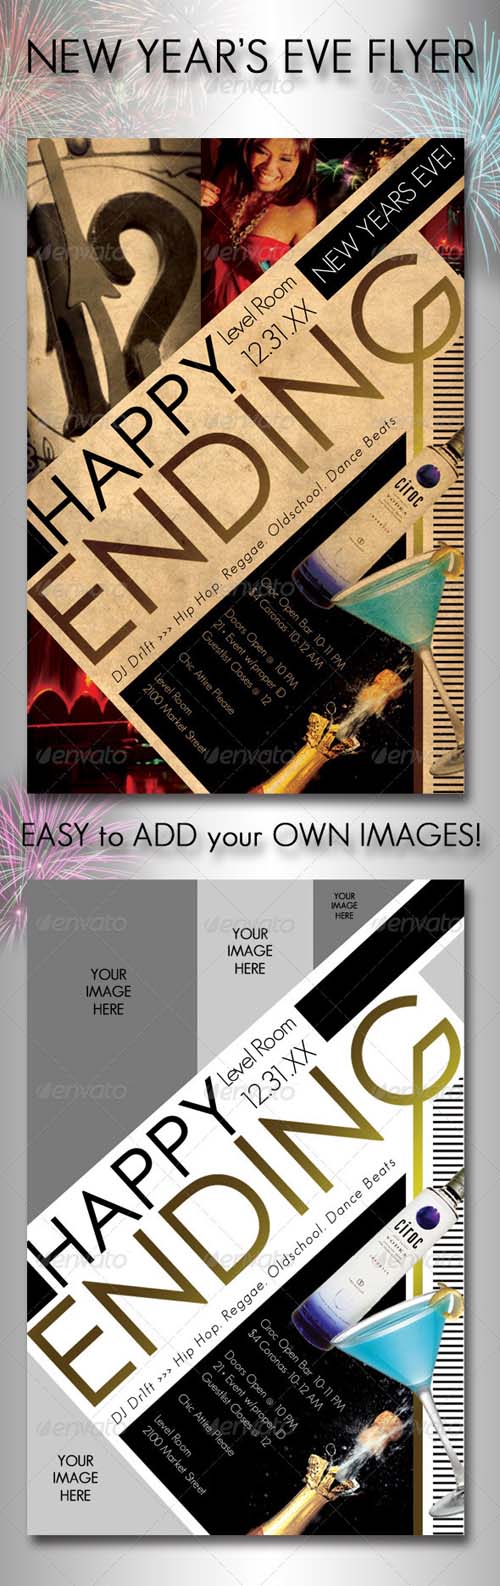 GraphicRiver - New Years Eve Flyer 712198